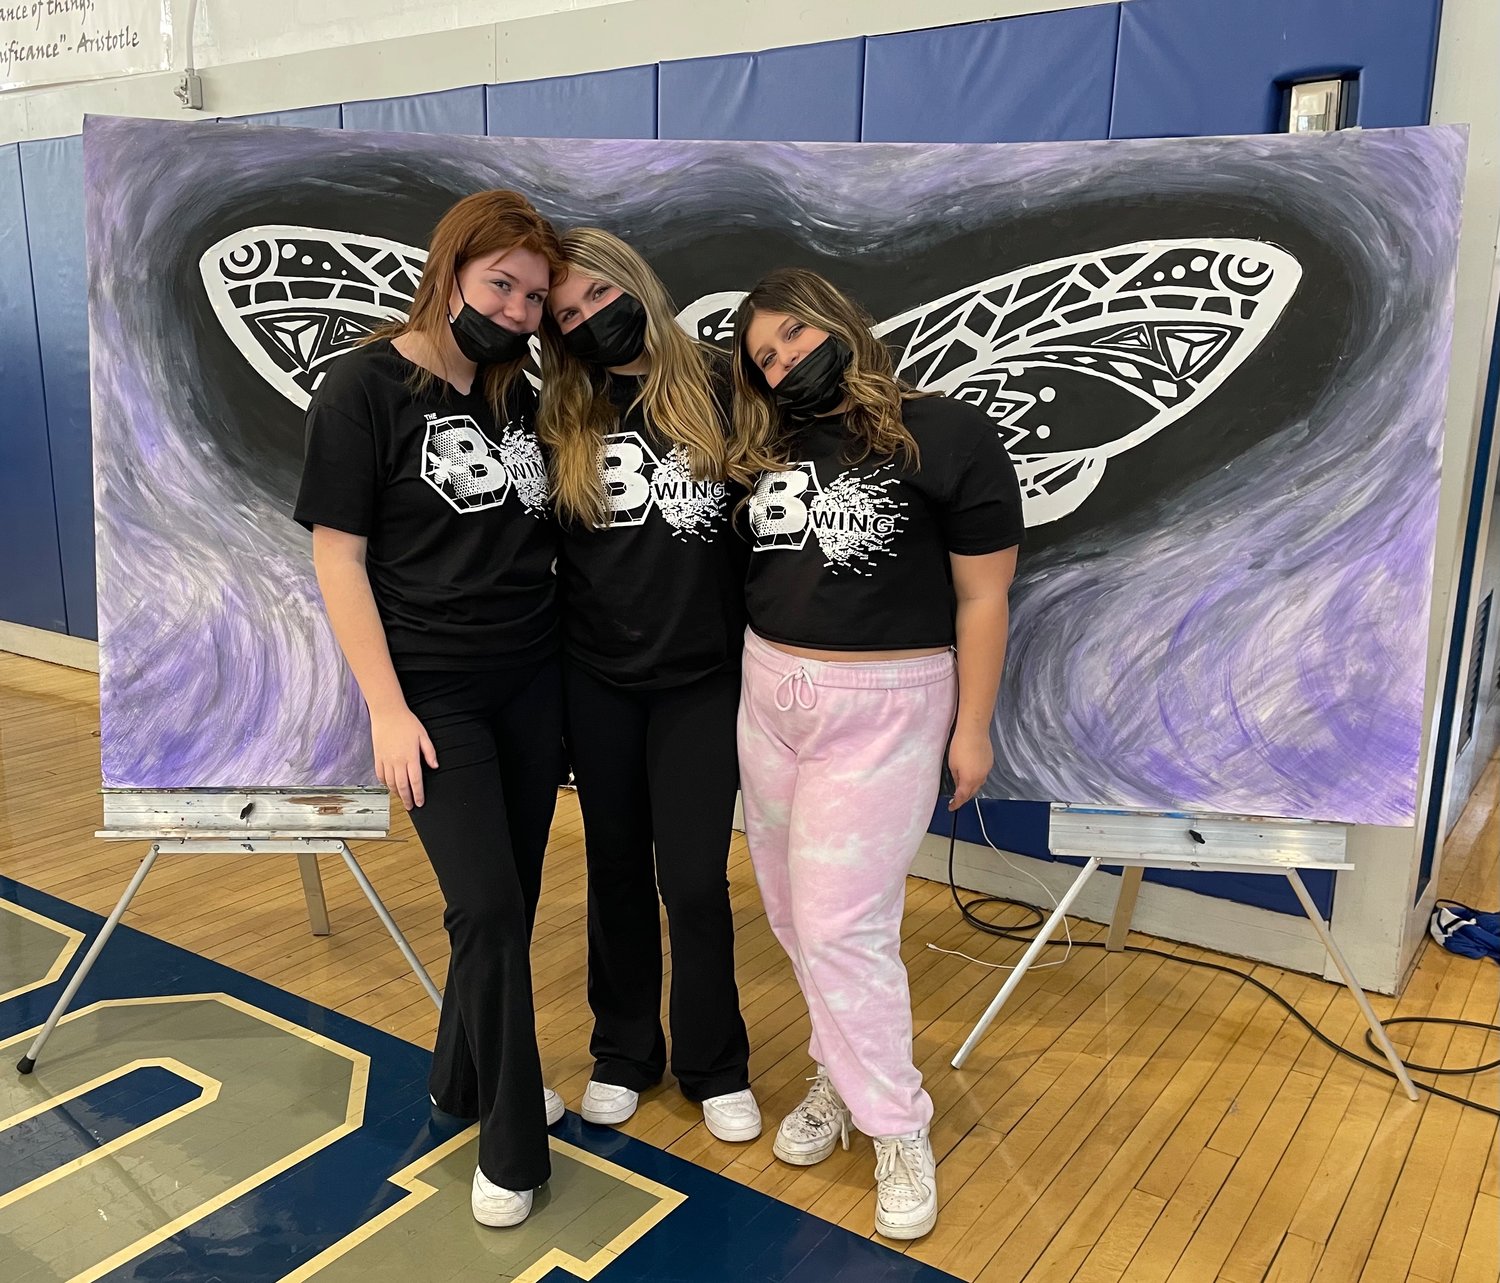 Calhoun students Natalia Lesniewski, Emma Swirsky and Carlee Hanna with their visual display, which students were able to use as a backdrop.